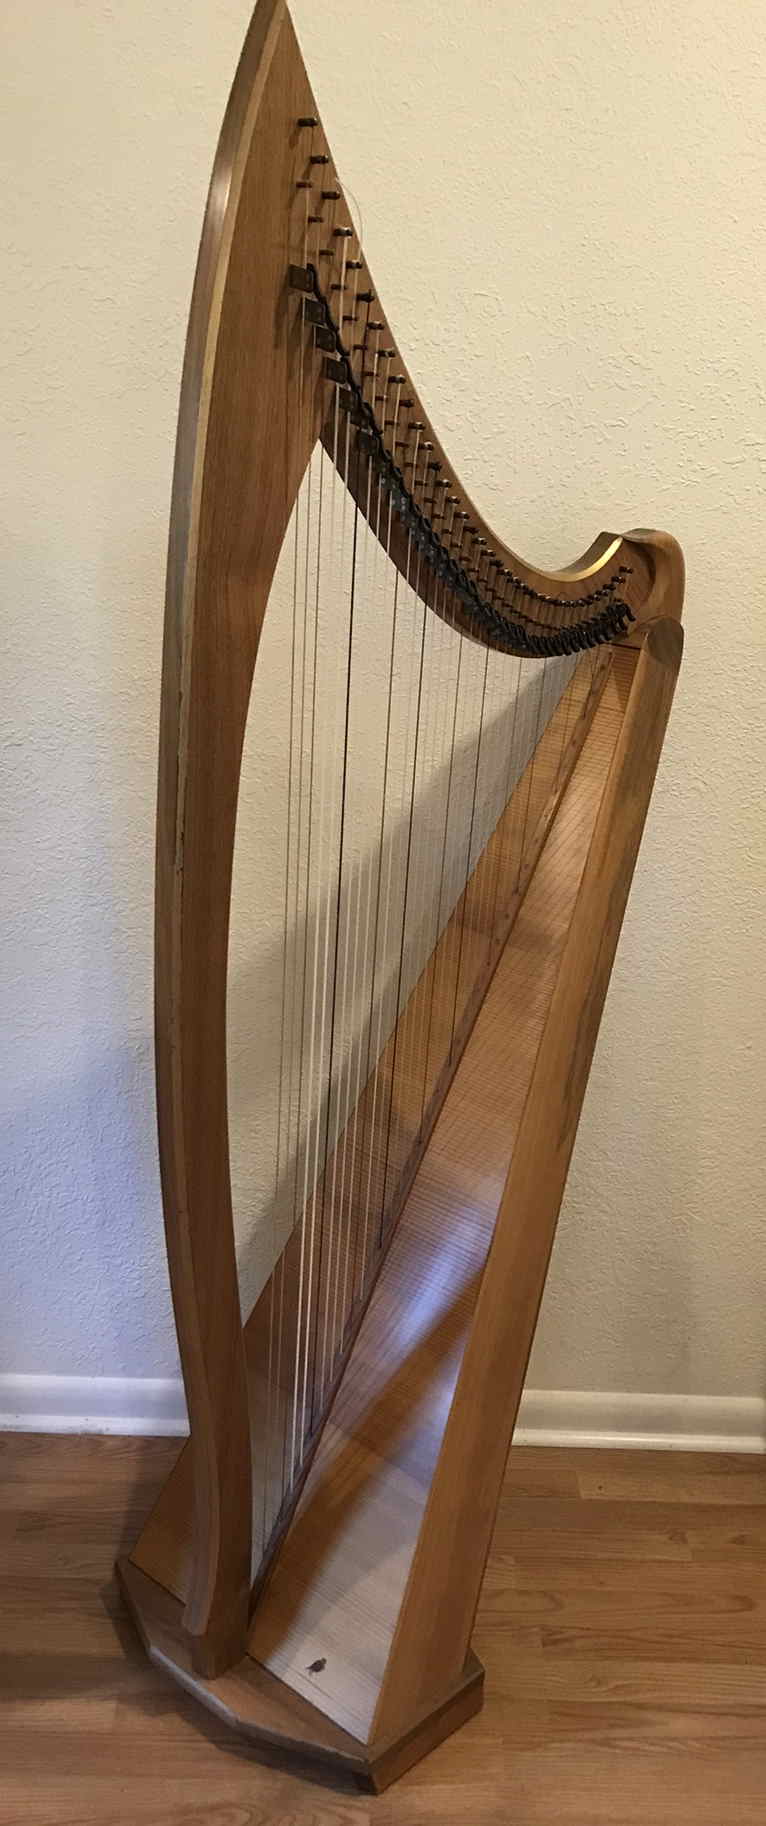 Professional Lever Harp – 36 strings